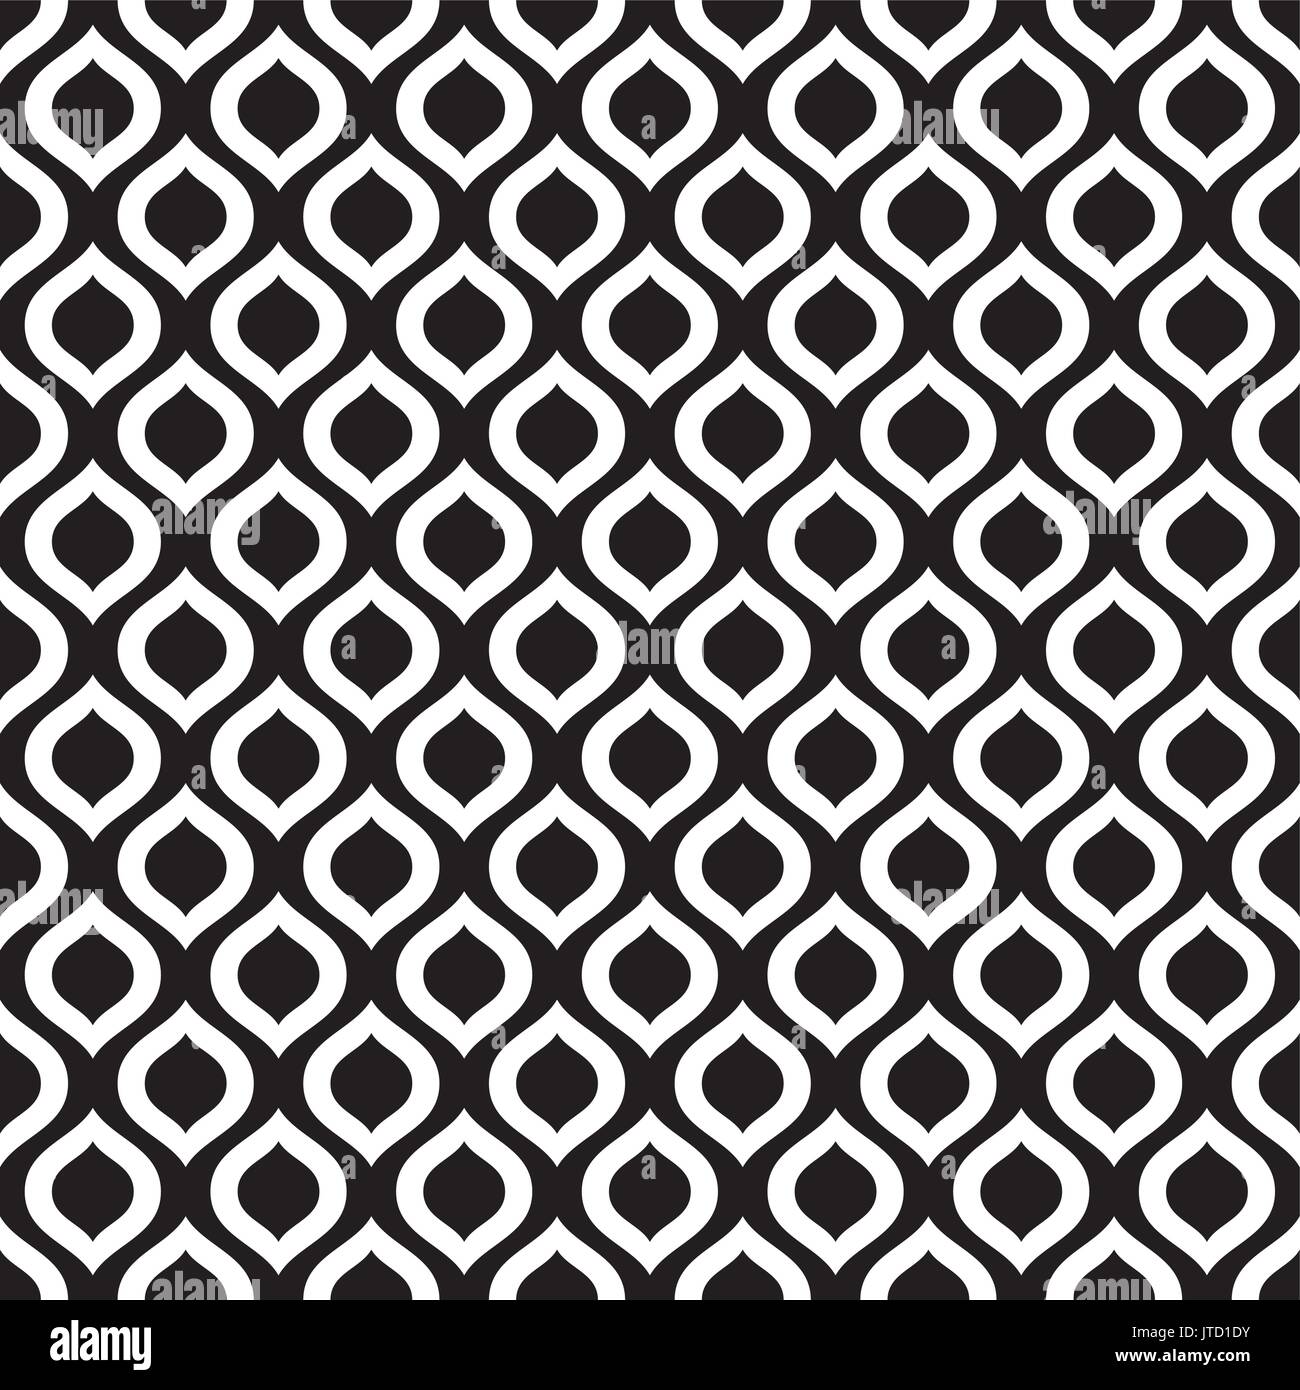 Wavy black and white seamless pattern in Arabian style. Endless texture for textile, wallpaper, backgrounds, wrappers. Monochrome geometric ornaments. Stock Vector